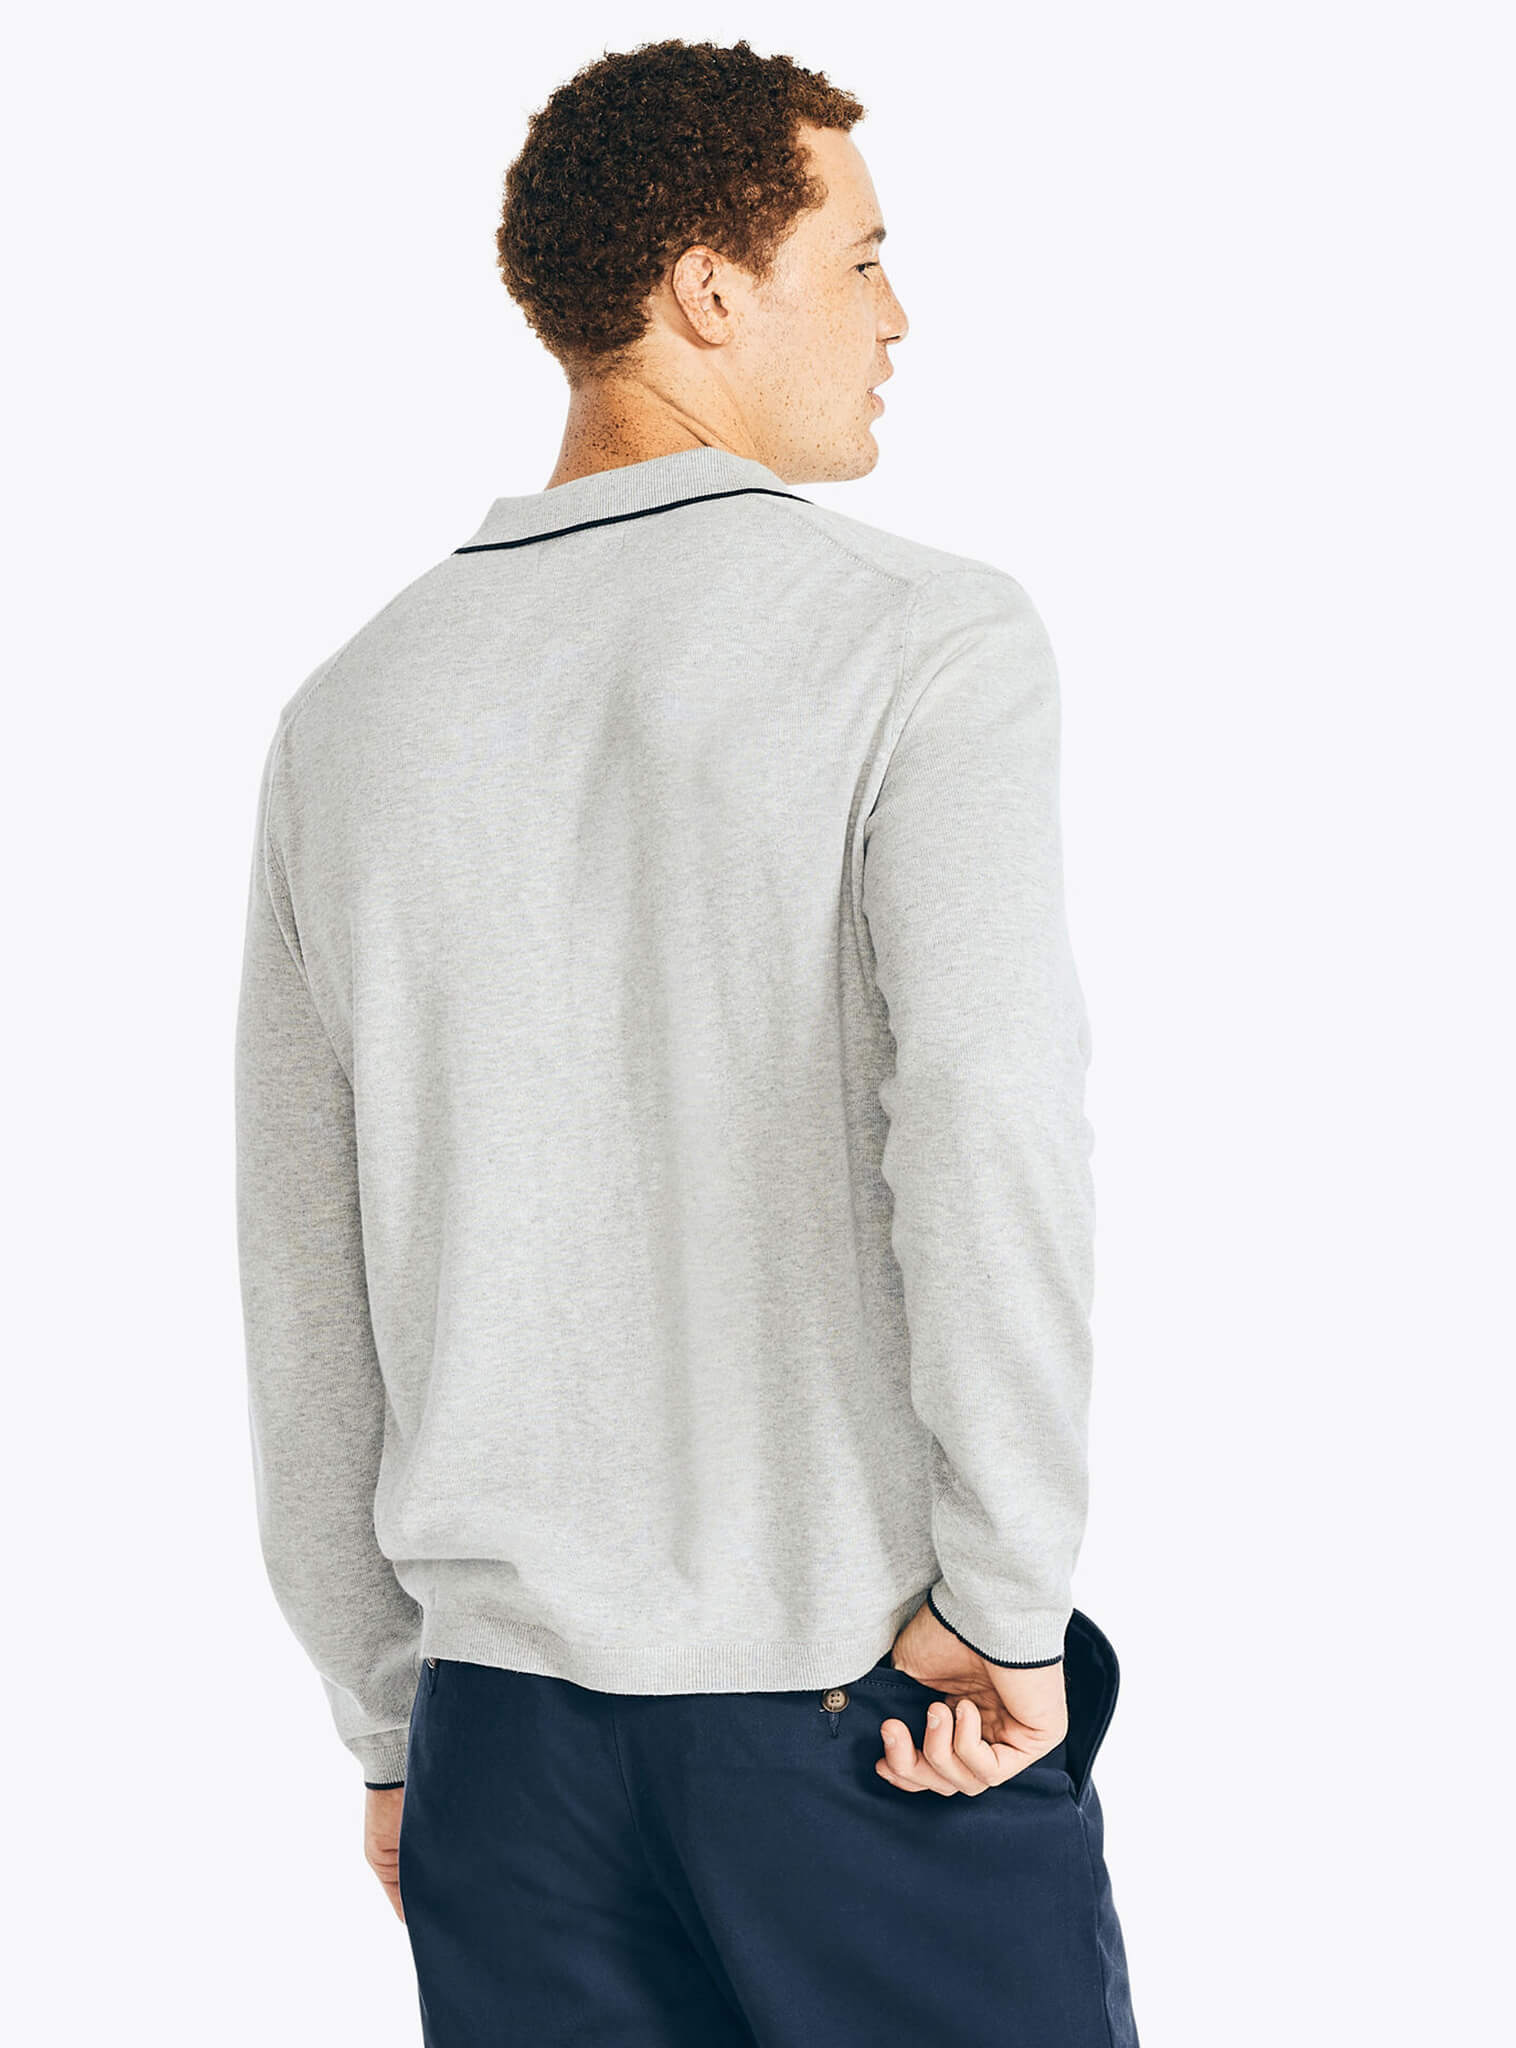 Sweater Manga Larga Con Cuello Sustainably Crafted Gris Hombre